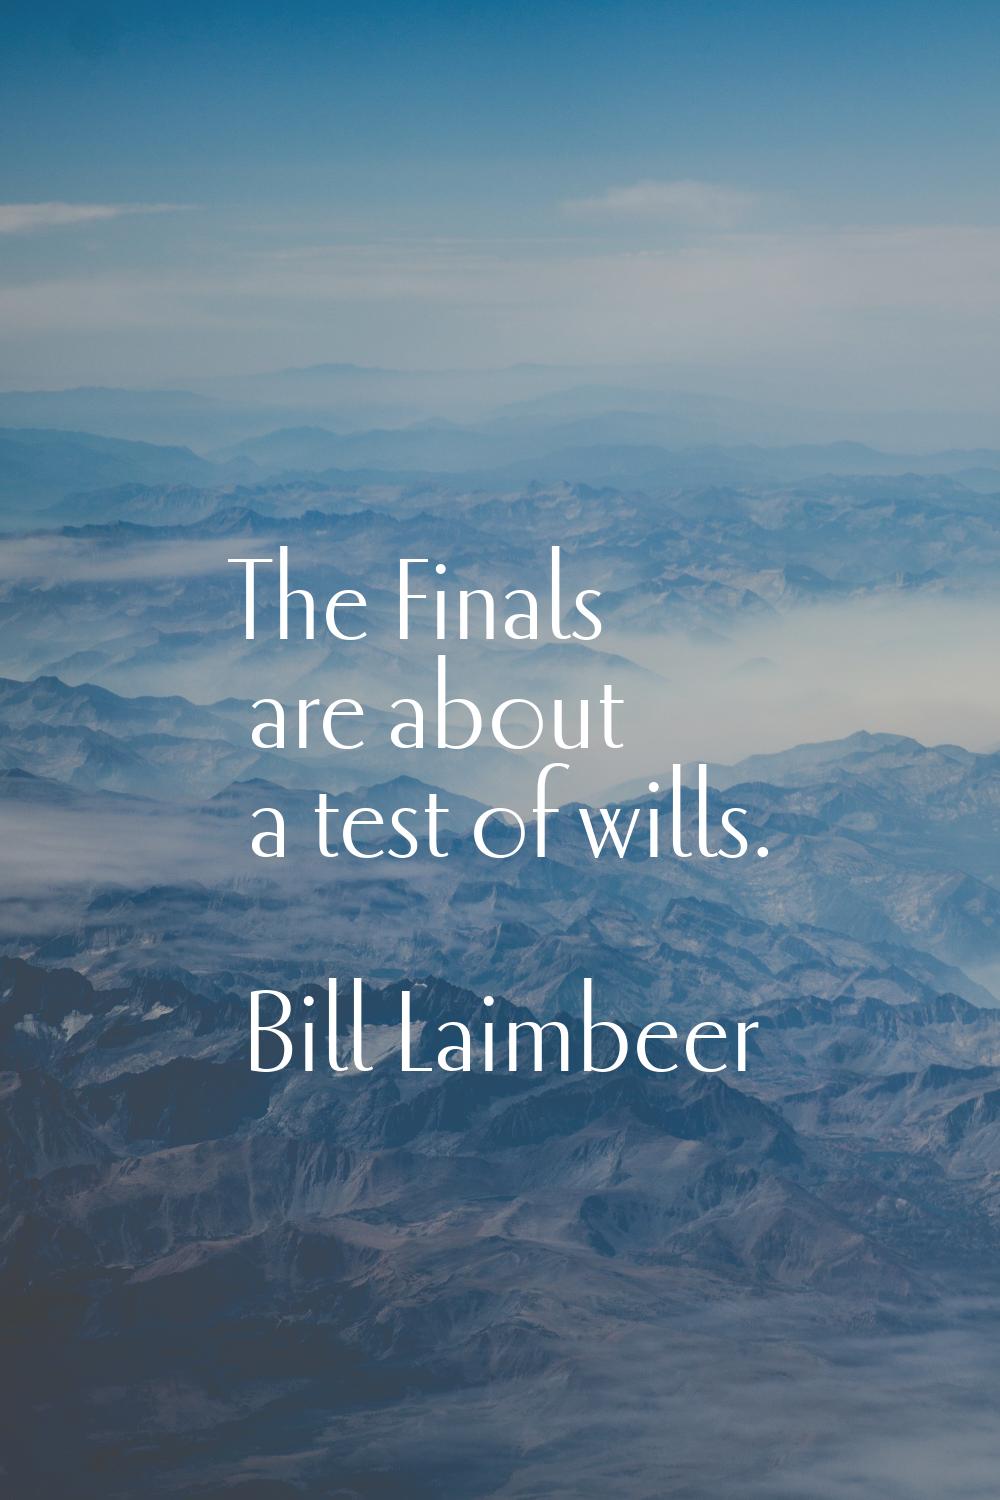 The Finals are about a test of wills.